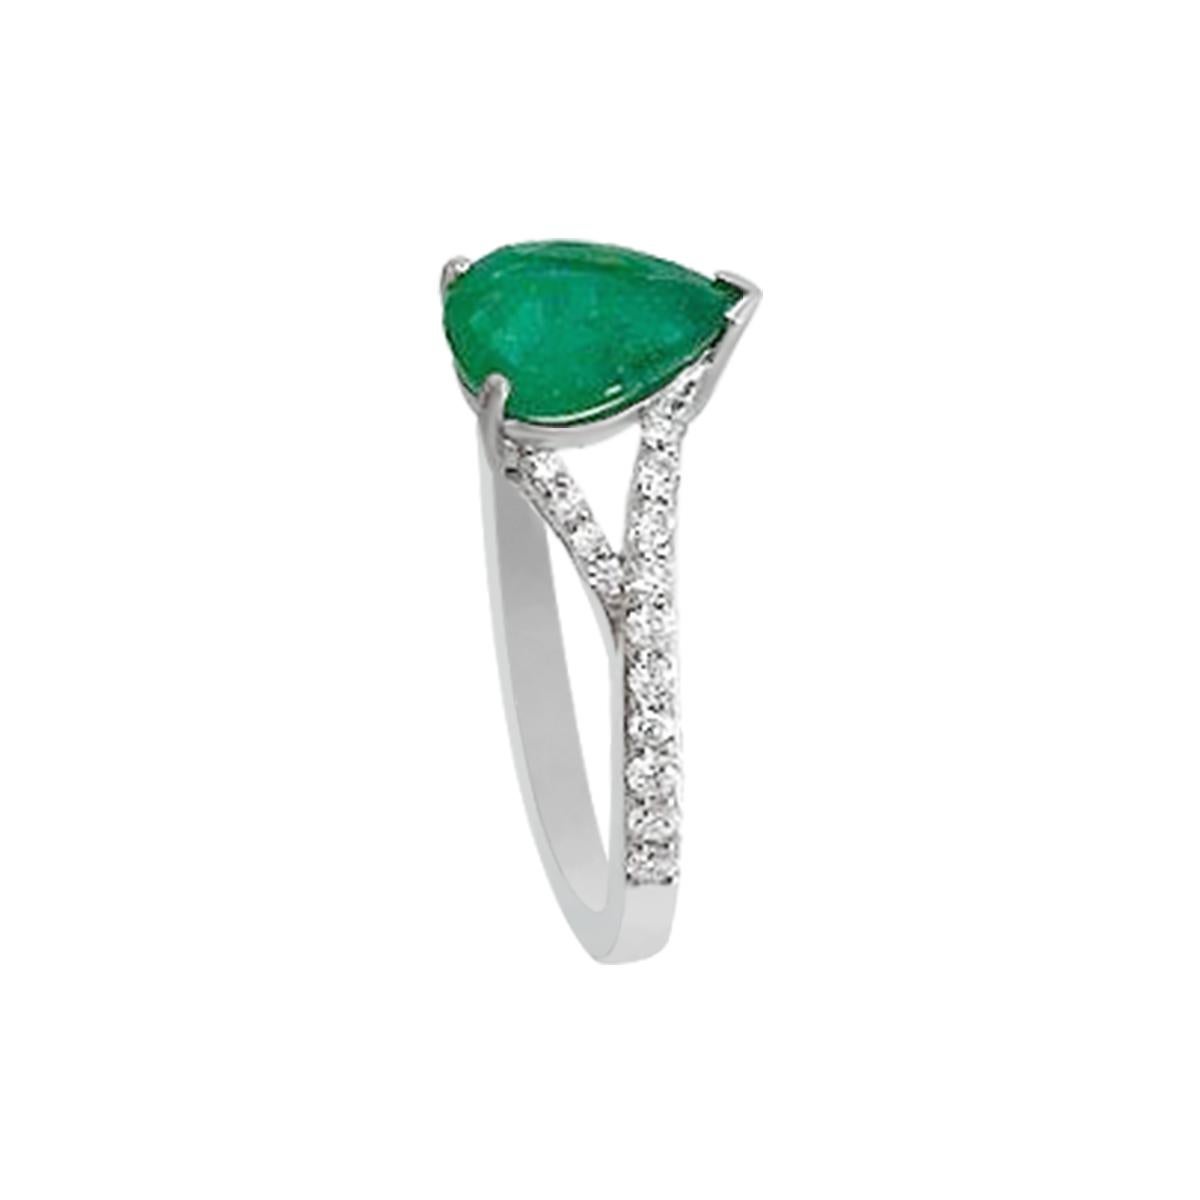 This Rich And Sophisticated Design Features A Center 8X6mm Pear Shape Elegant Emerald Gemstone Surrounded By Prong Set Diamonds.
This Gorgeous Ring With Emerald Gemstone Is Crafted Beautifully In 18K White Gold Mounting.


Style# TS1024R
Emerald :